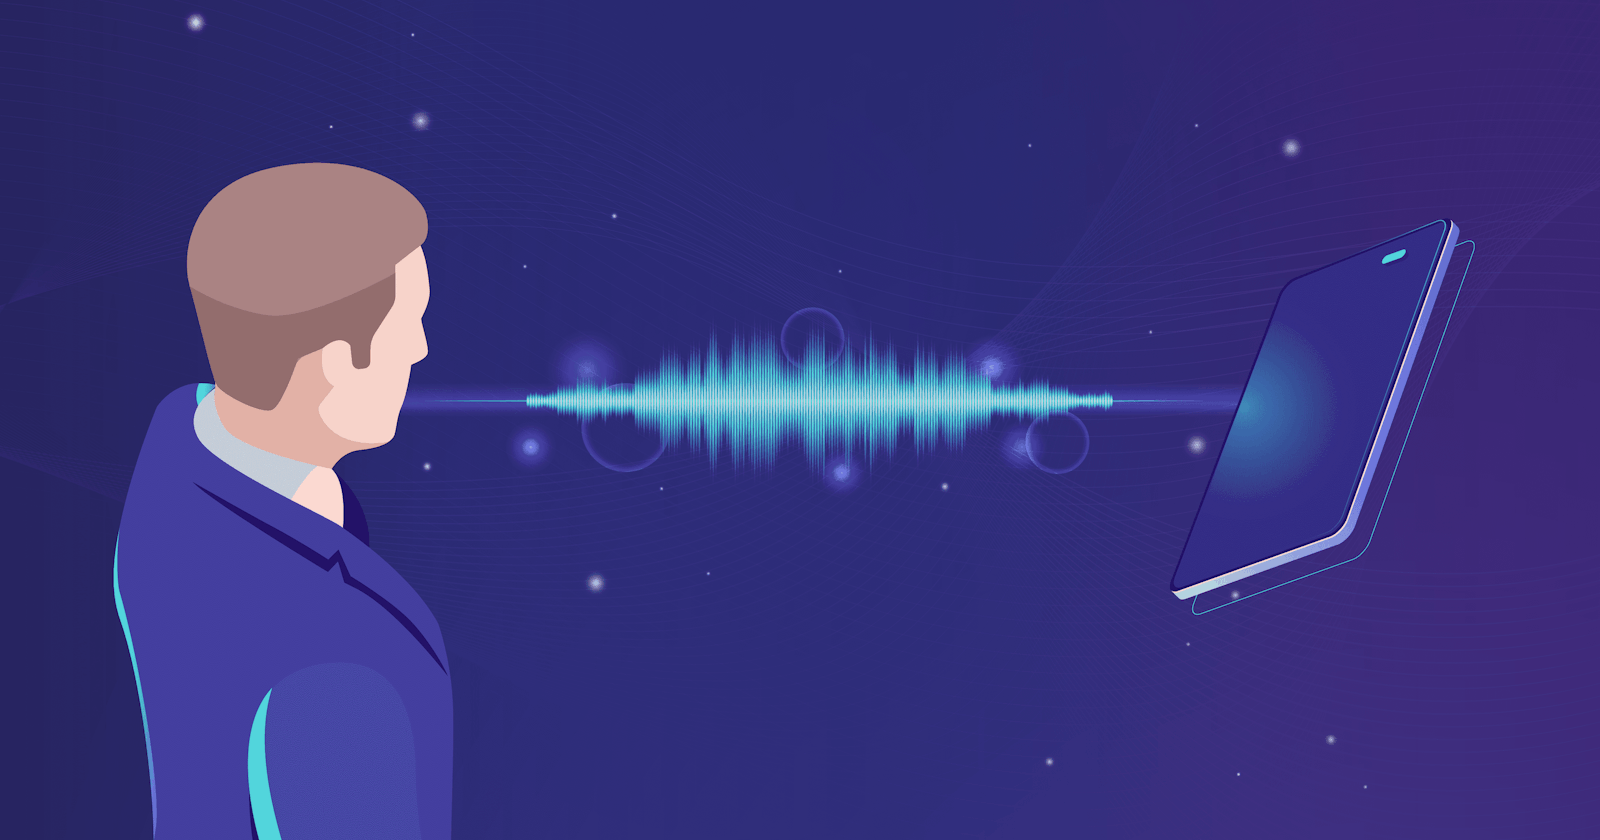 Getting Started with Speech Recognition in JS